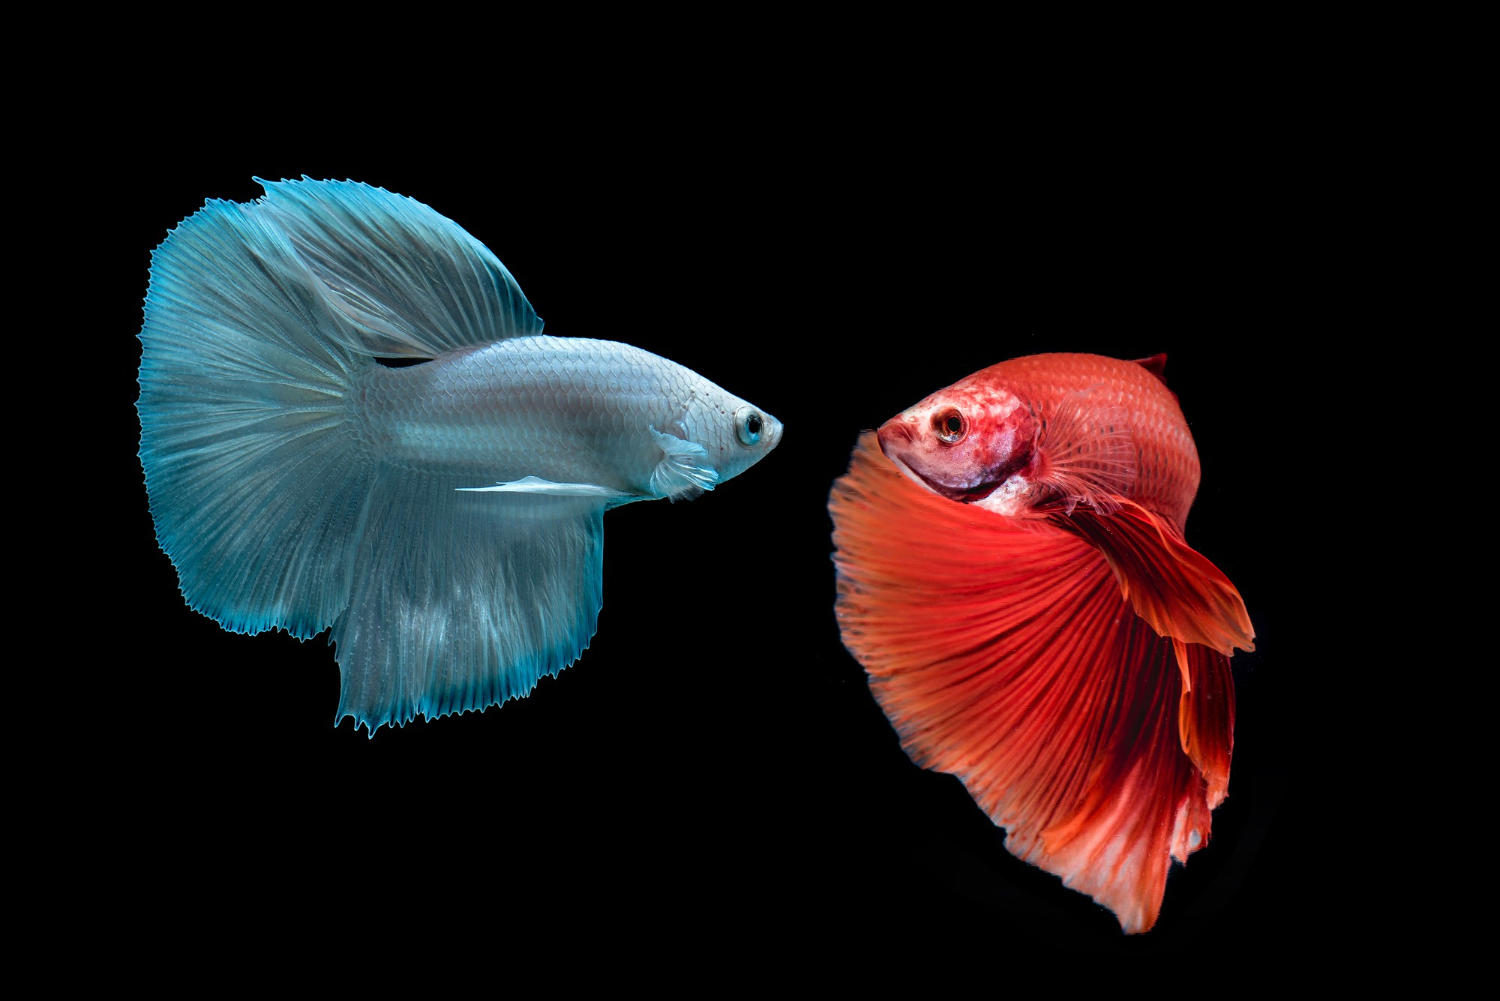 Tips for Introducing New Fish to Your Aquarium